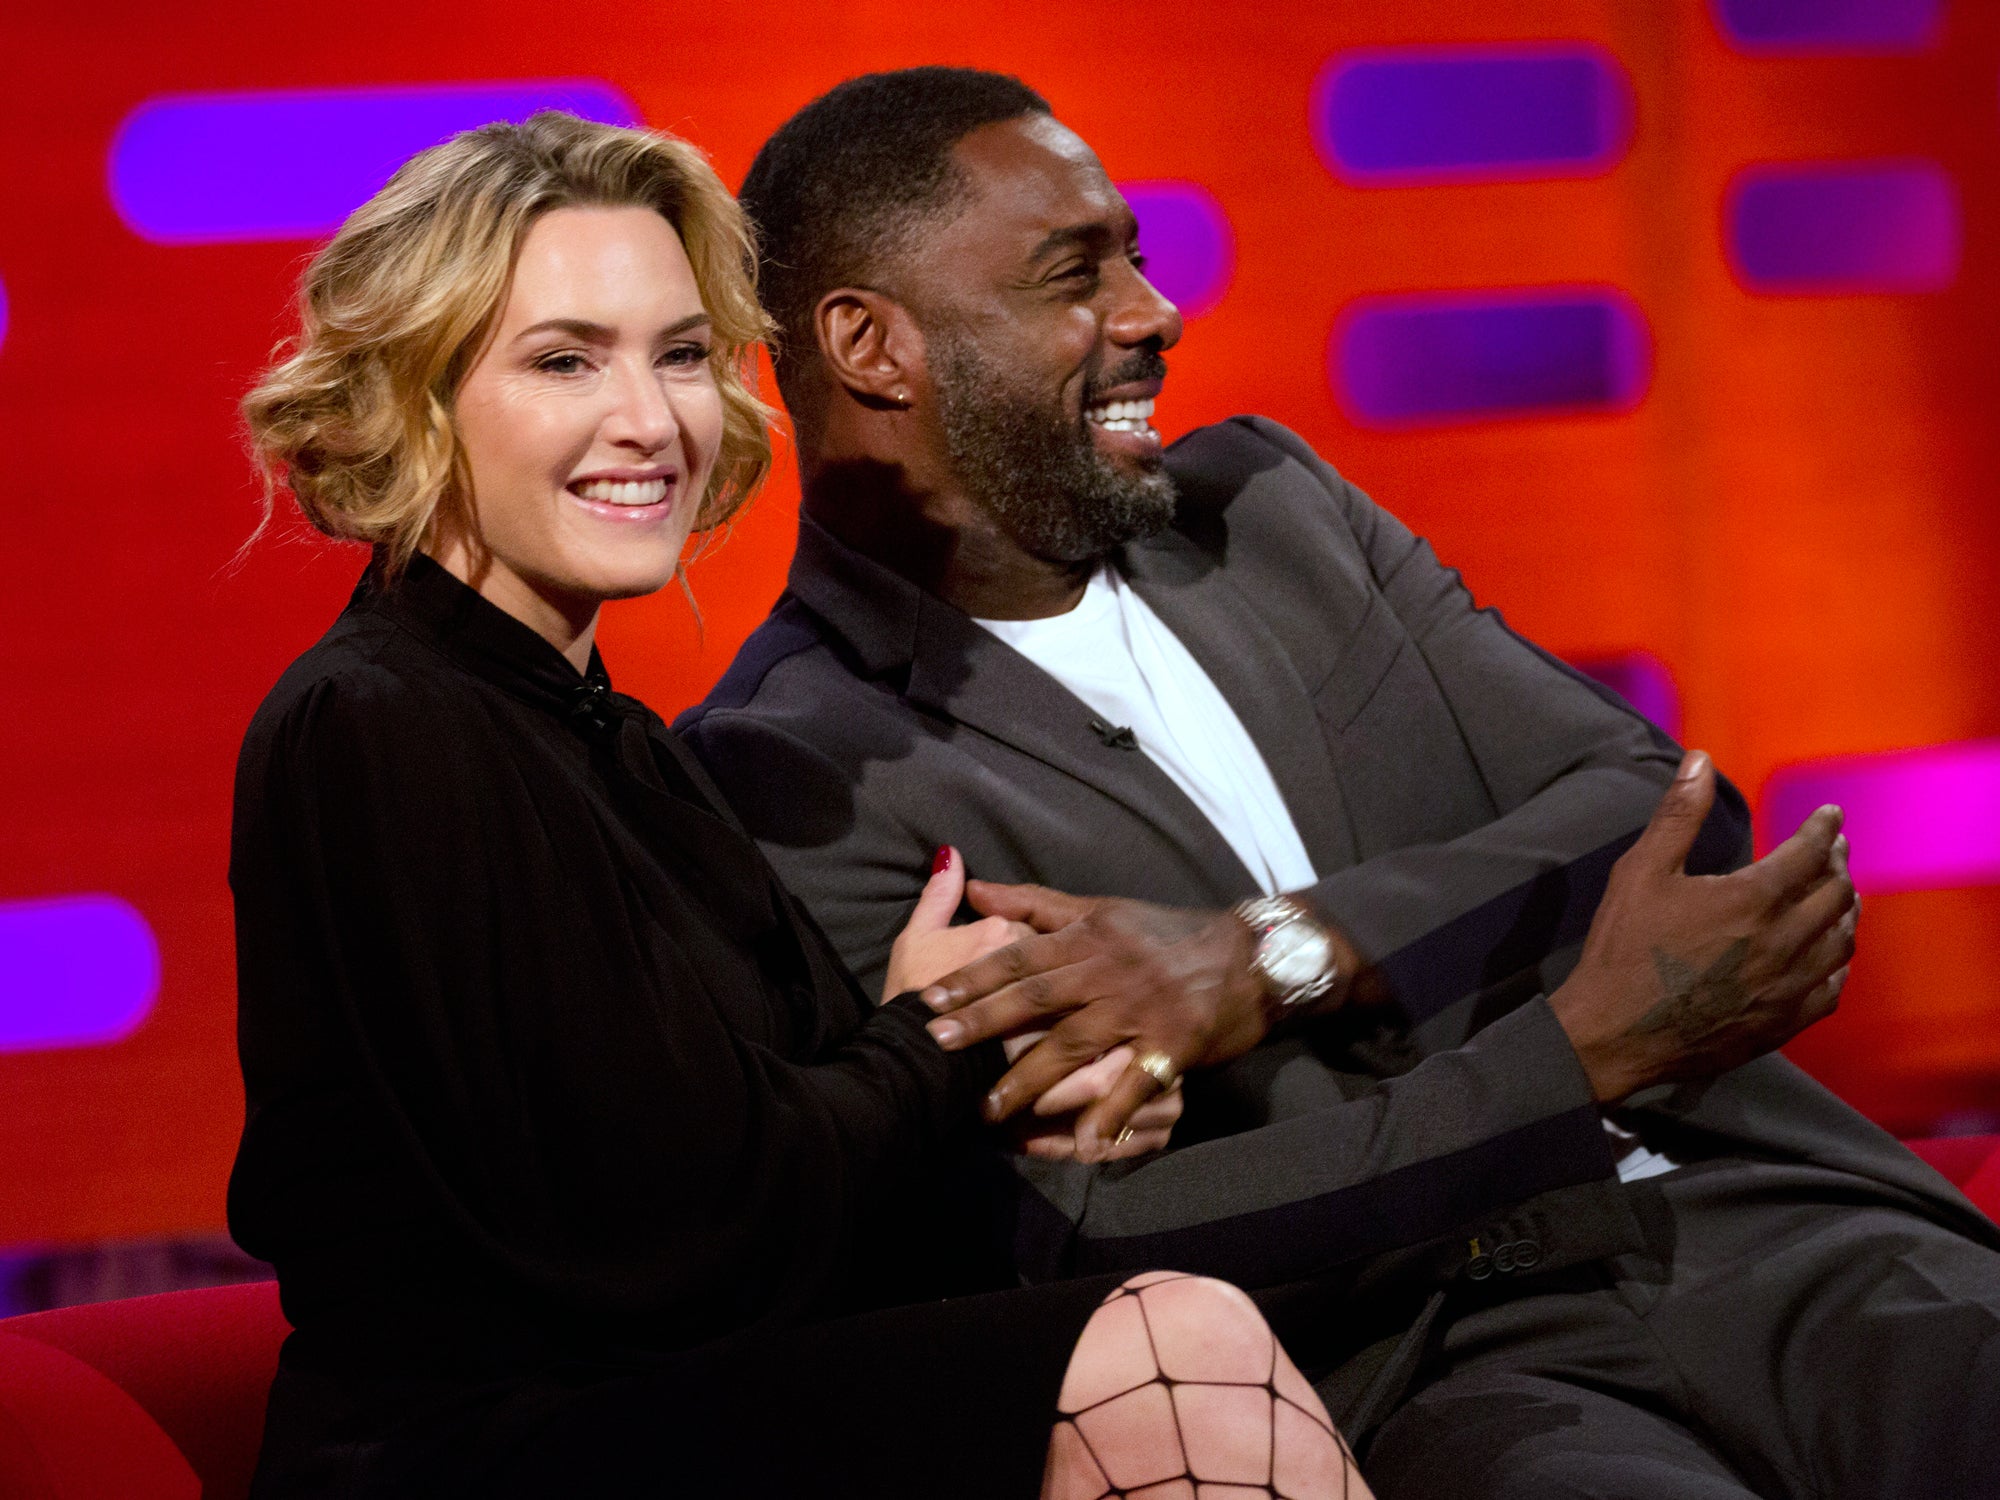 Actresses With A Foot Fetish - Kate Winslet Reveals Idris Elba Has A Foot Fetish | Essence